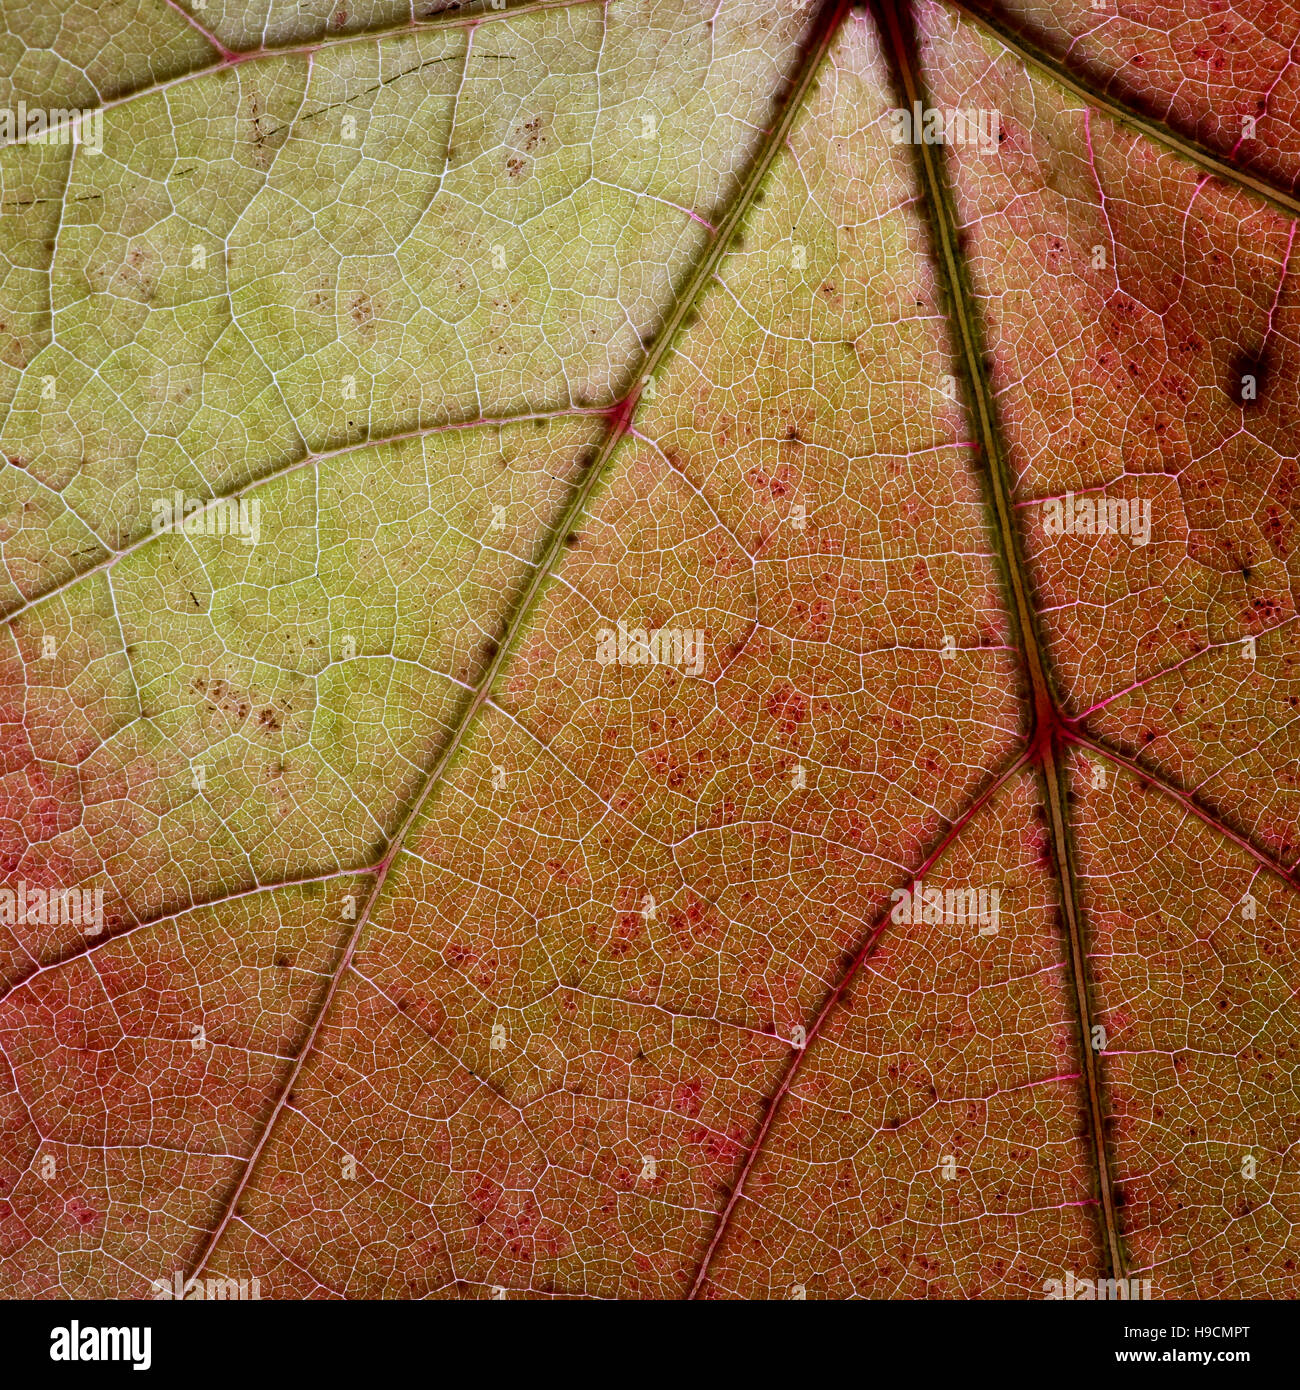 Light through a Red grape Ivy autumn leaf veins, great texture of autumn leaf reticulate venation Stock Photo